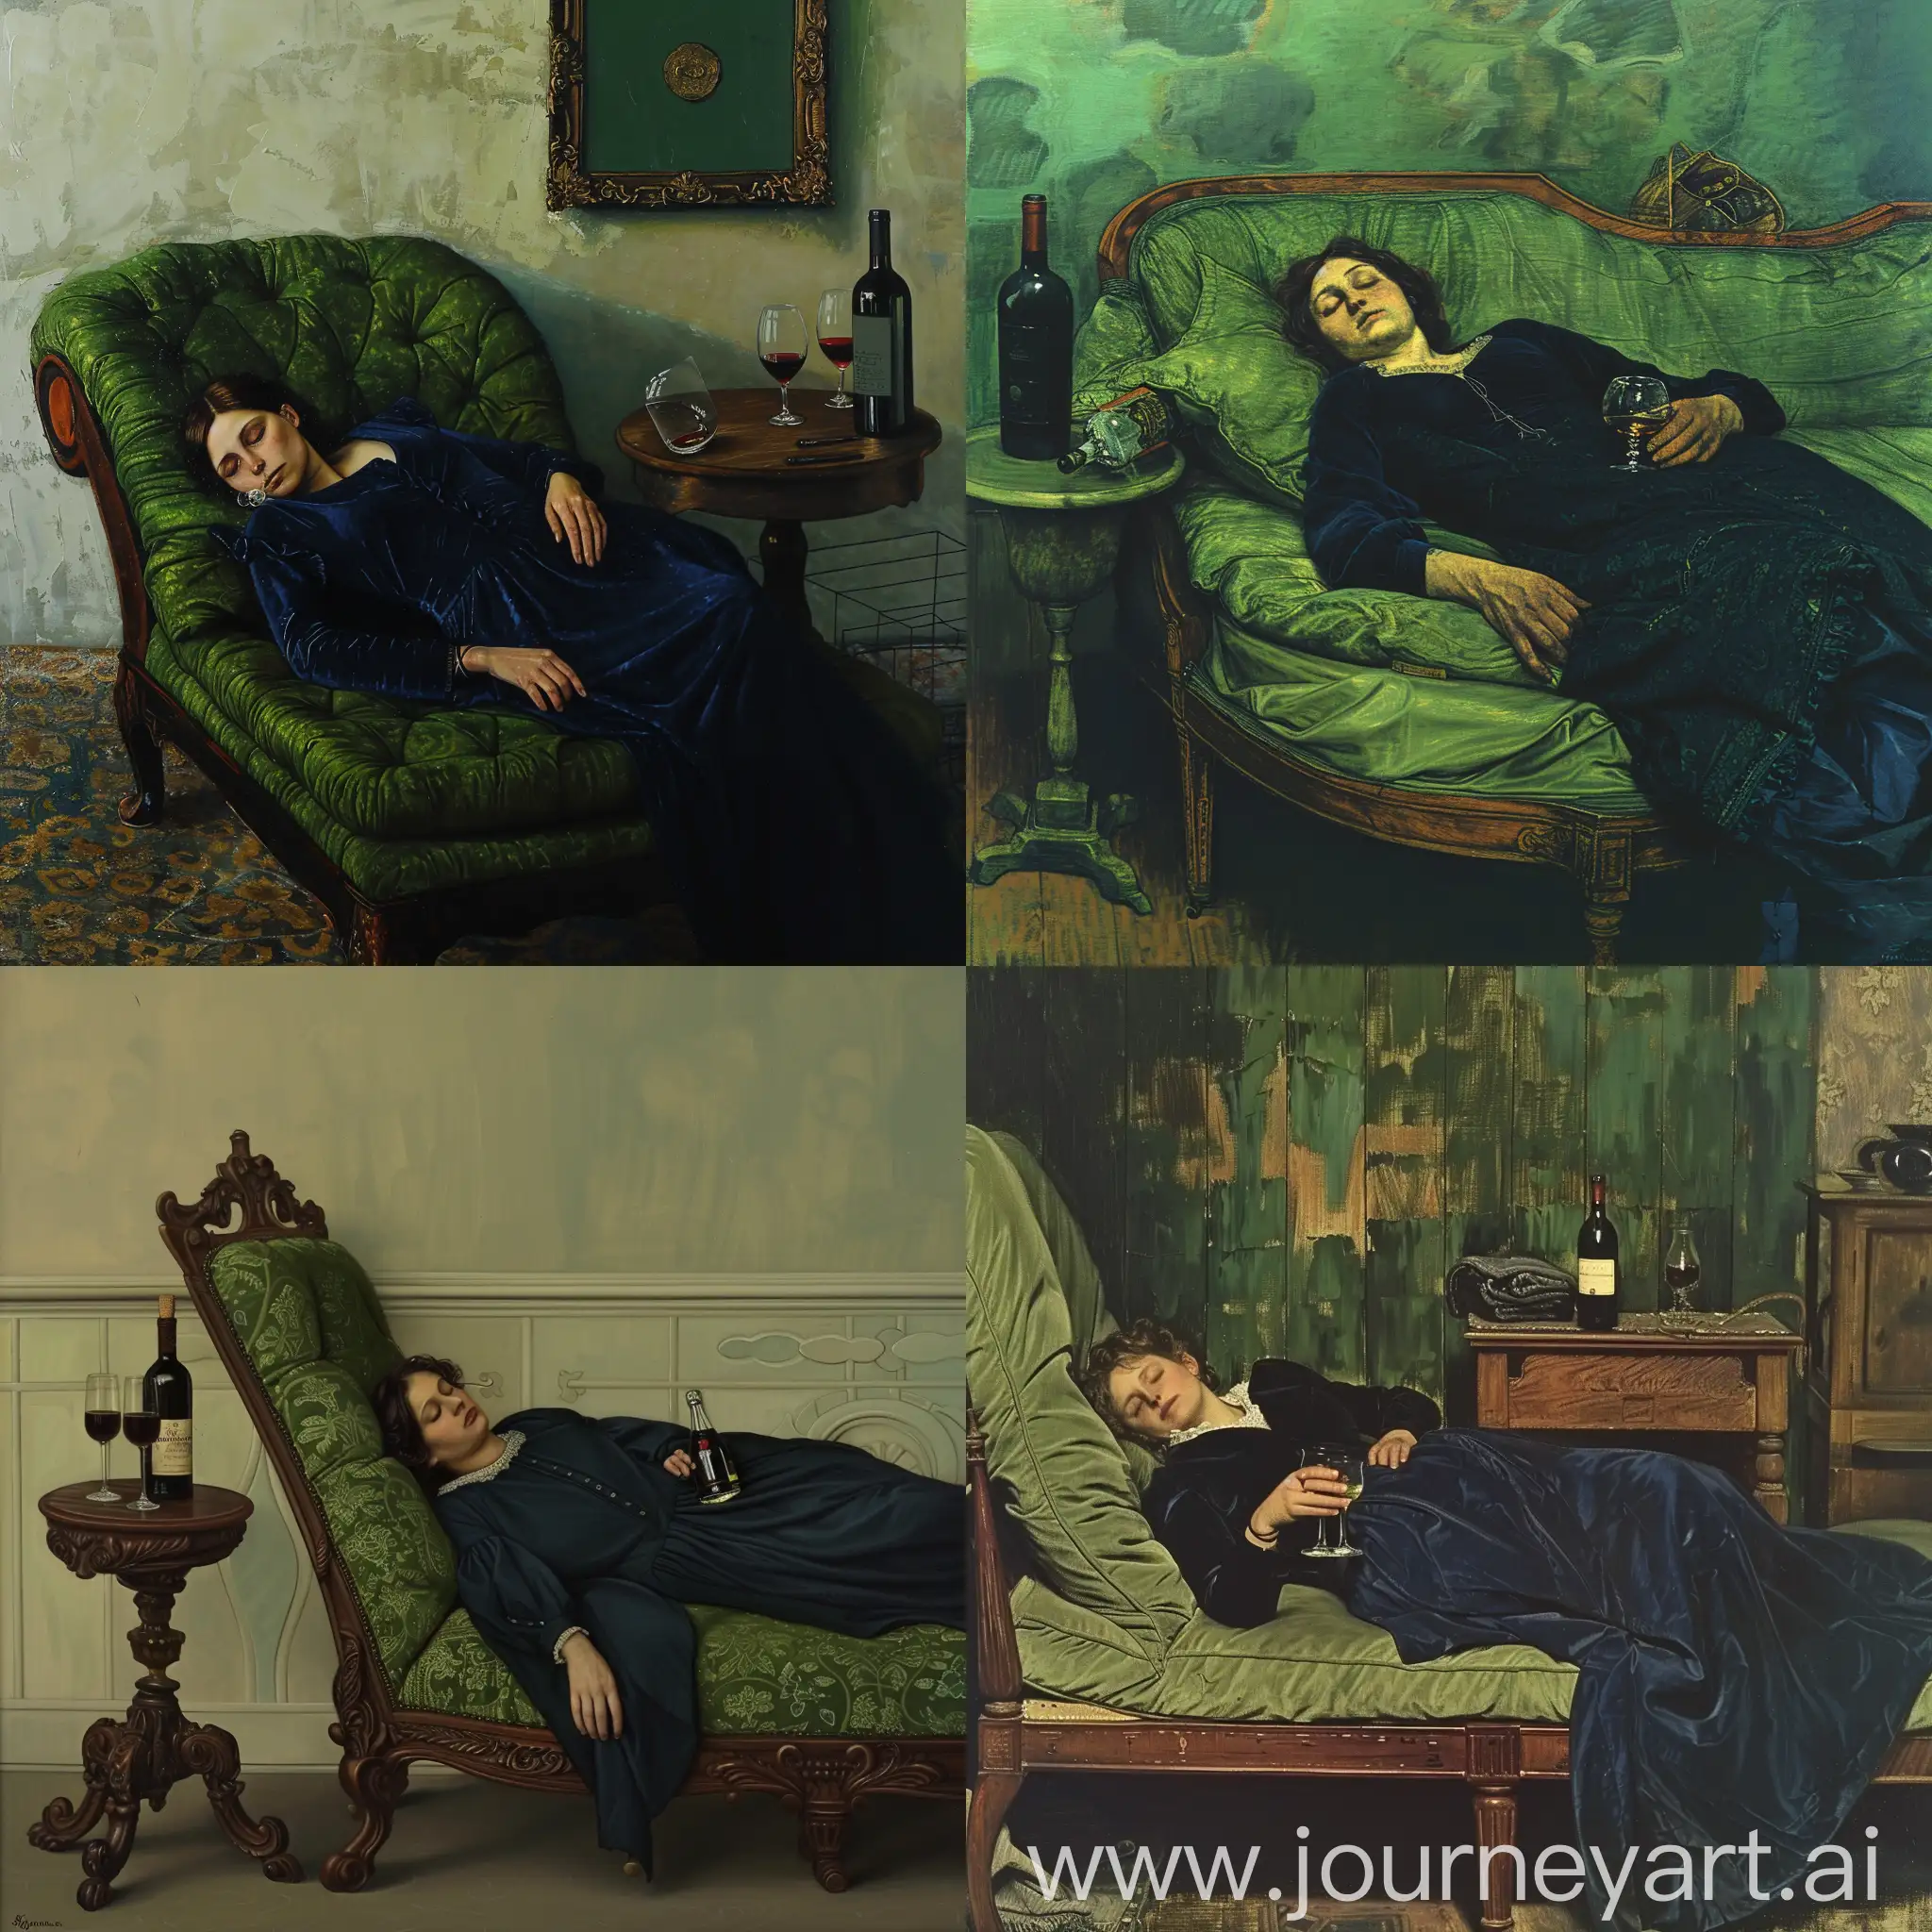 Drunk-Woman-on-Chaise-Longue-with-Empty-Wine-Glass-and-Bottle-in-19th-Century-Oil-Painting-Style